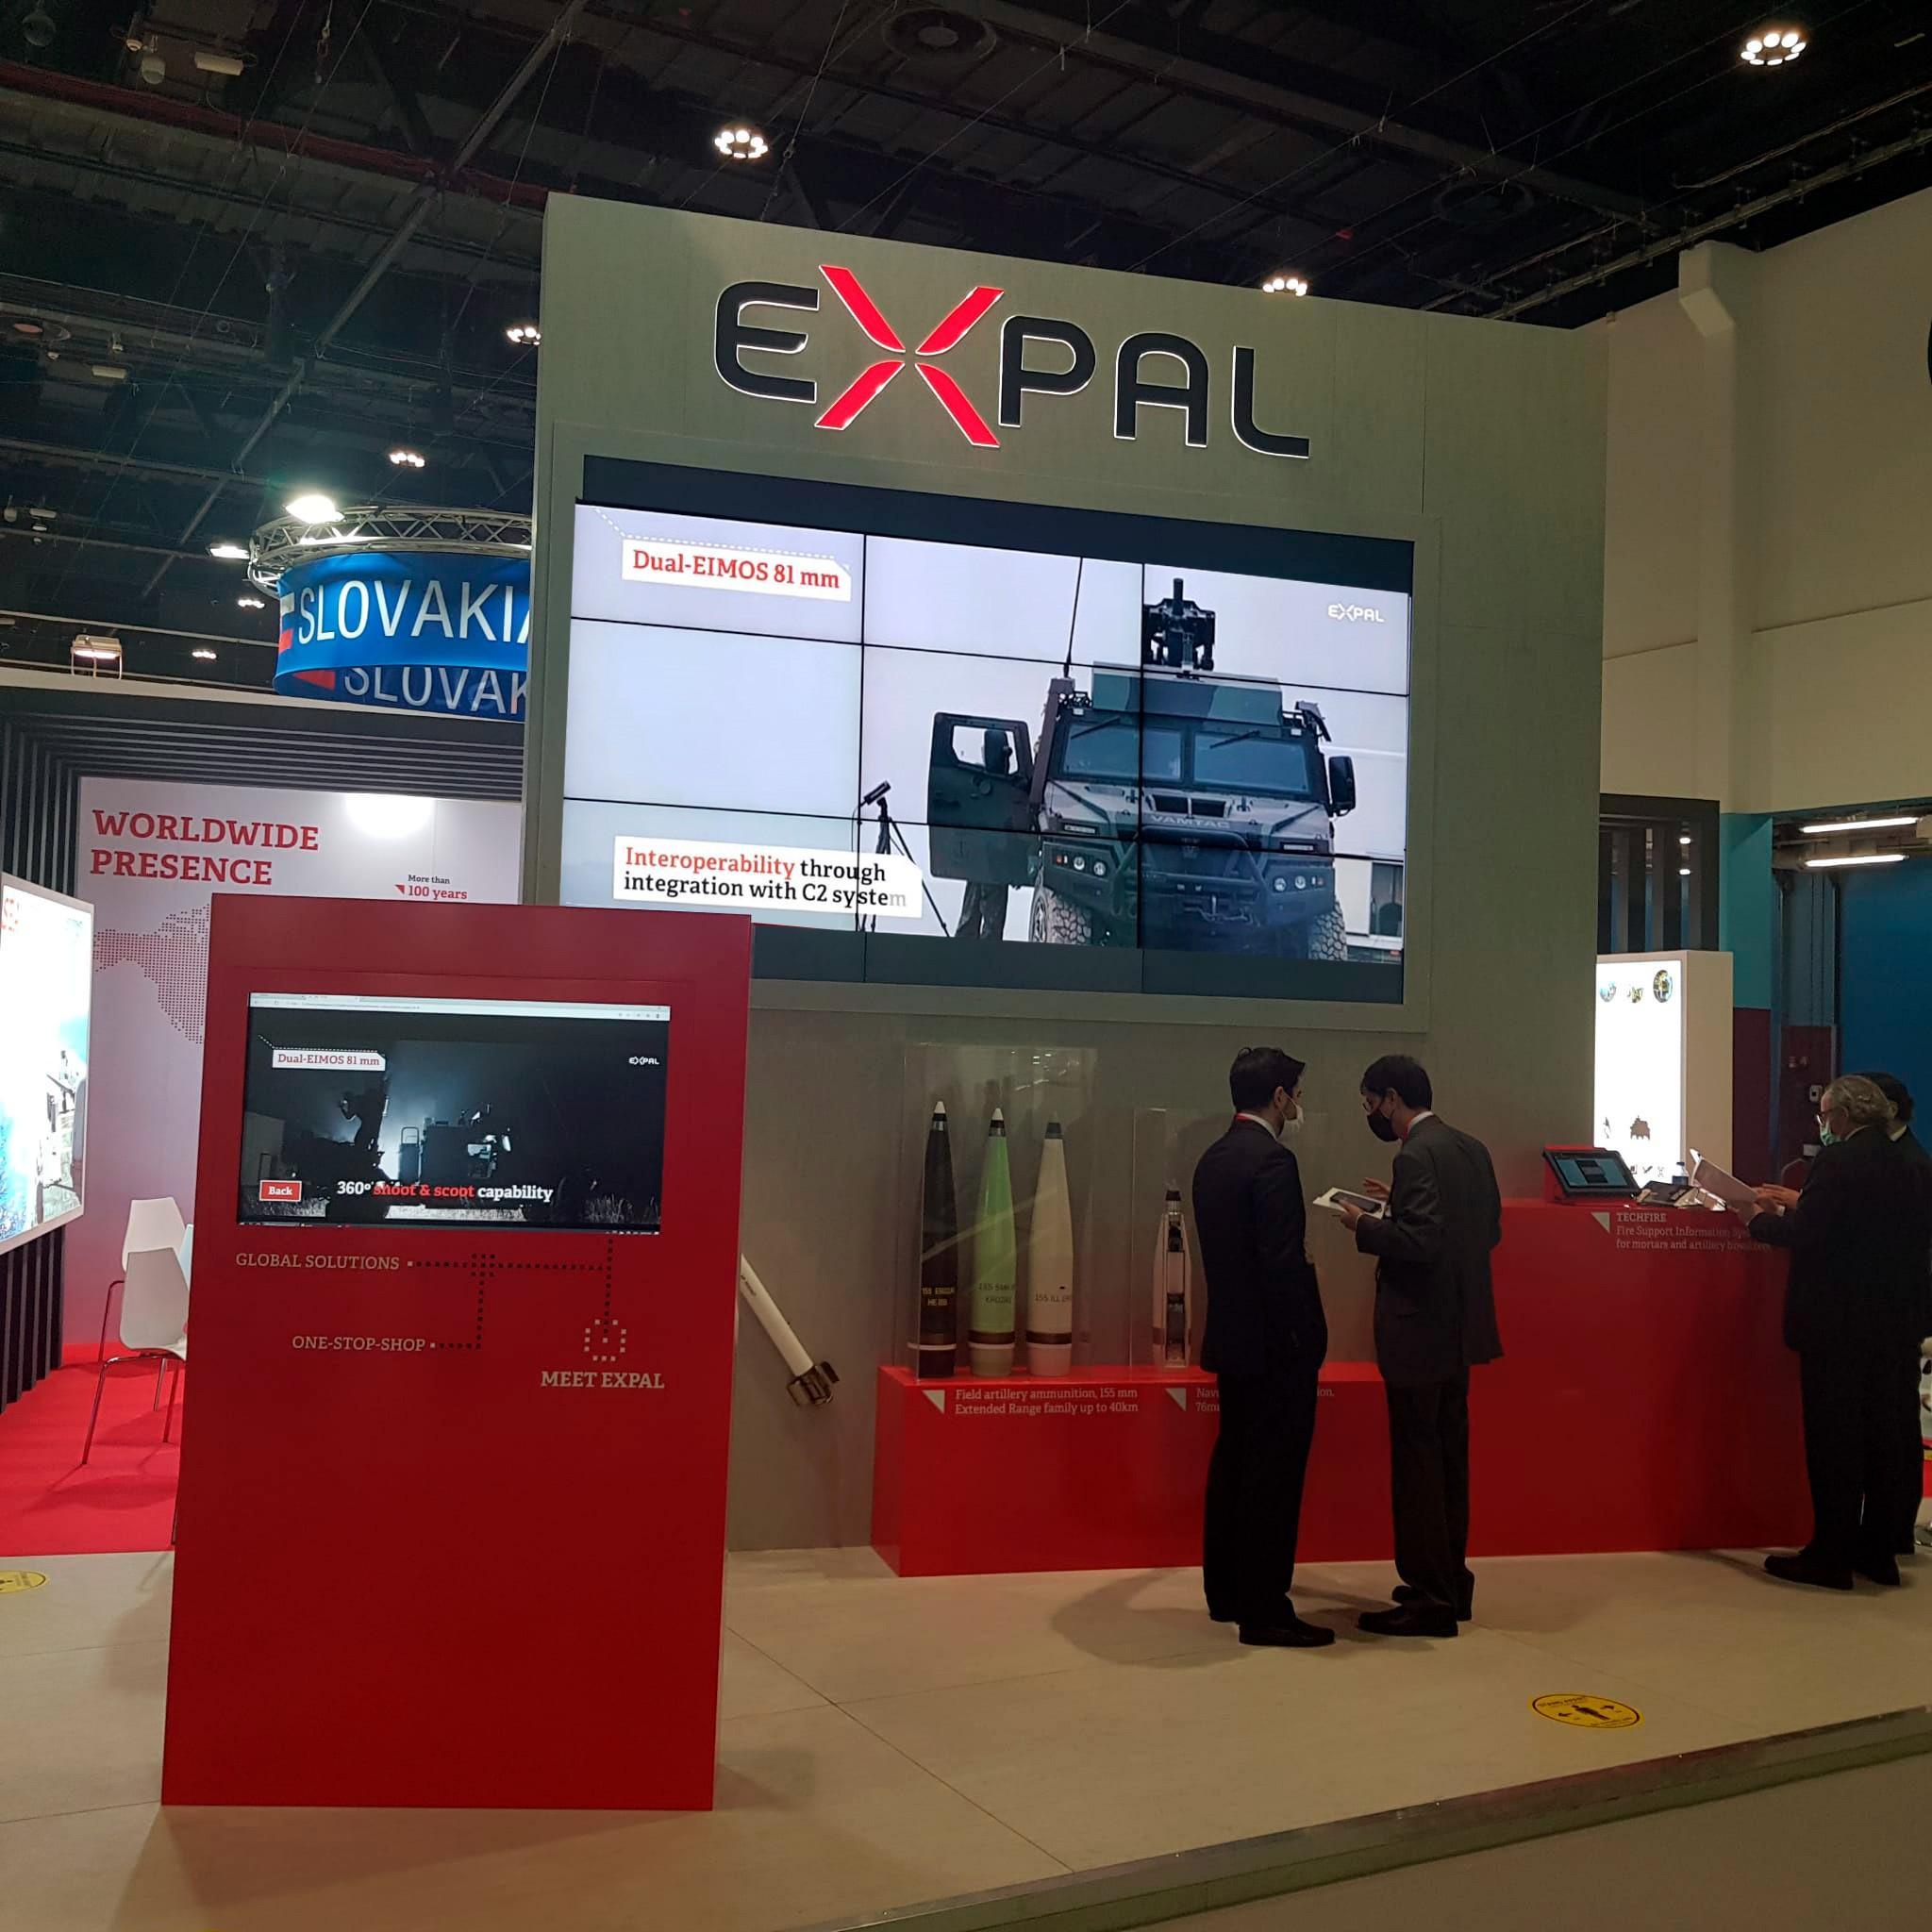 EXPAL Systems